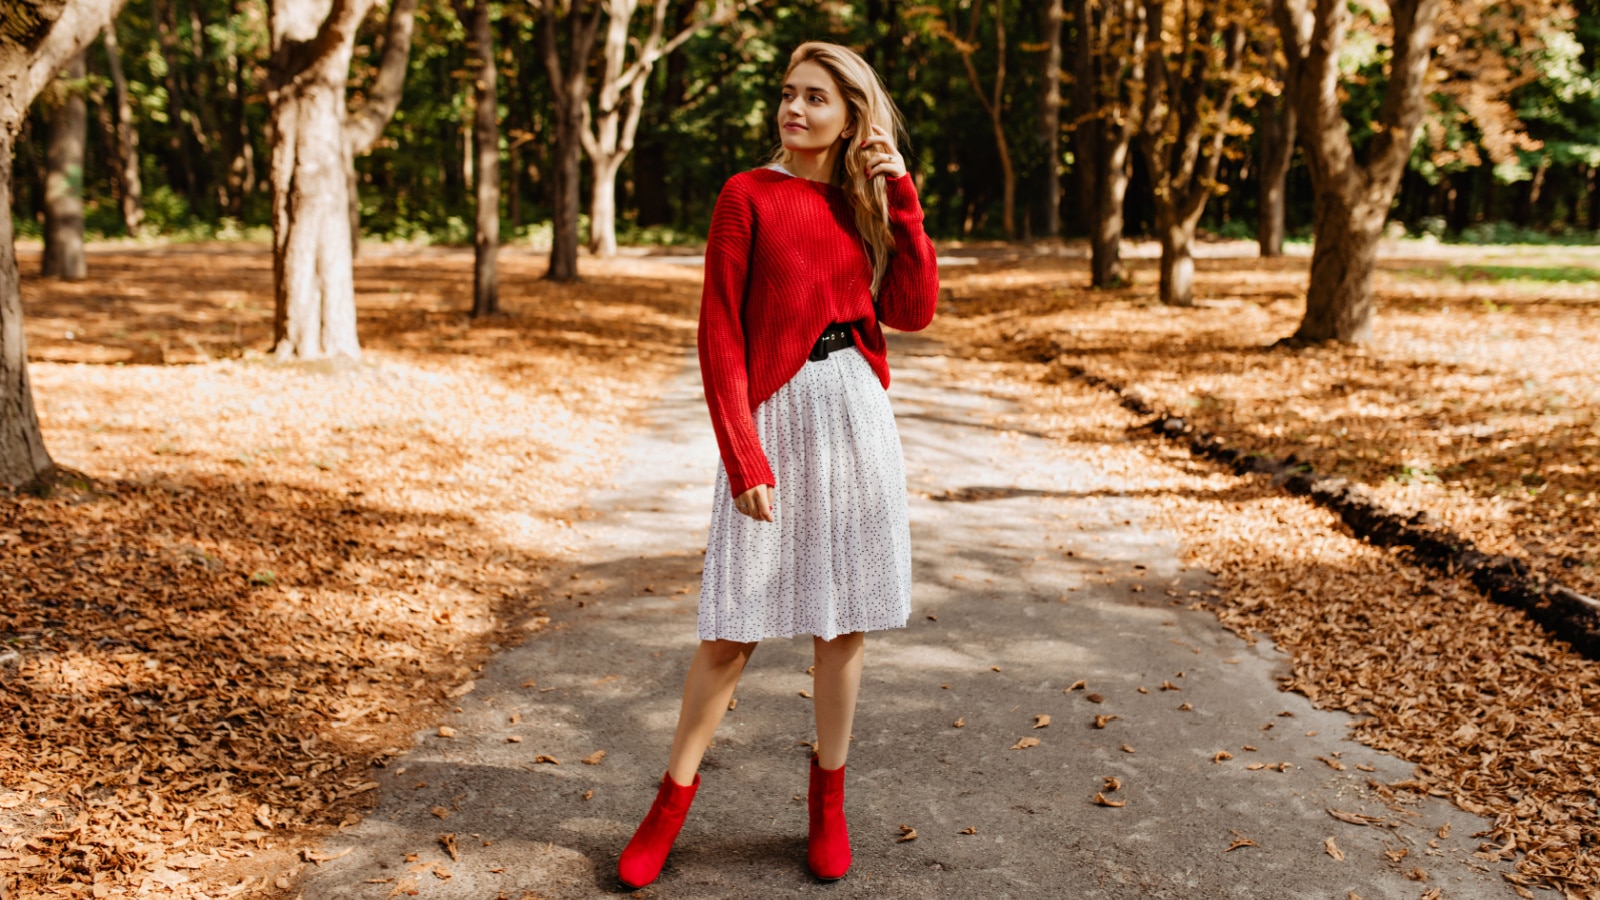 Attractive blonde girl posing in trendy clothes in the autumn park. Young woman wearing red sweater and white skirt outdoor.